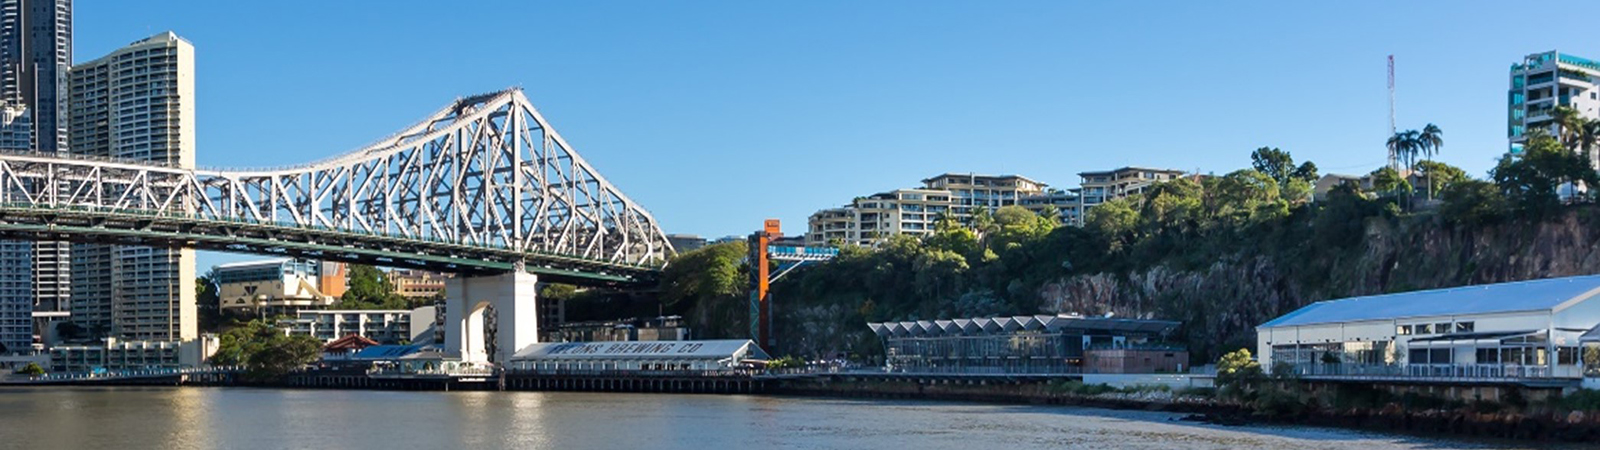 This image is taken from the Brisbane River looking at the Howard Smith Wharves precinct, the cliff face, and the story bridge.